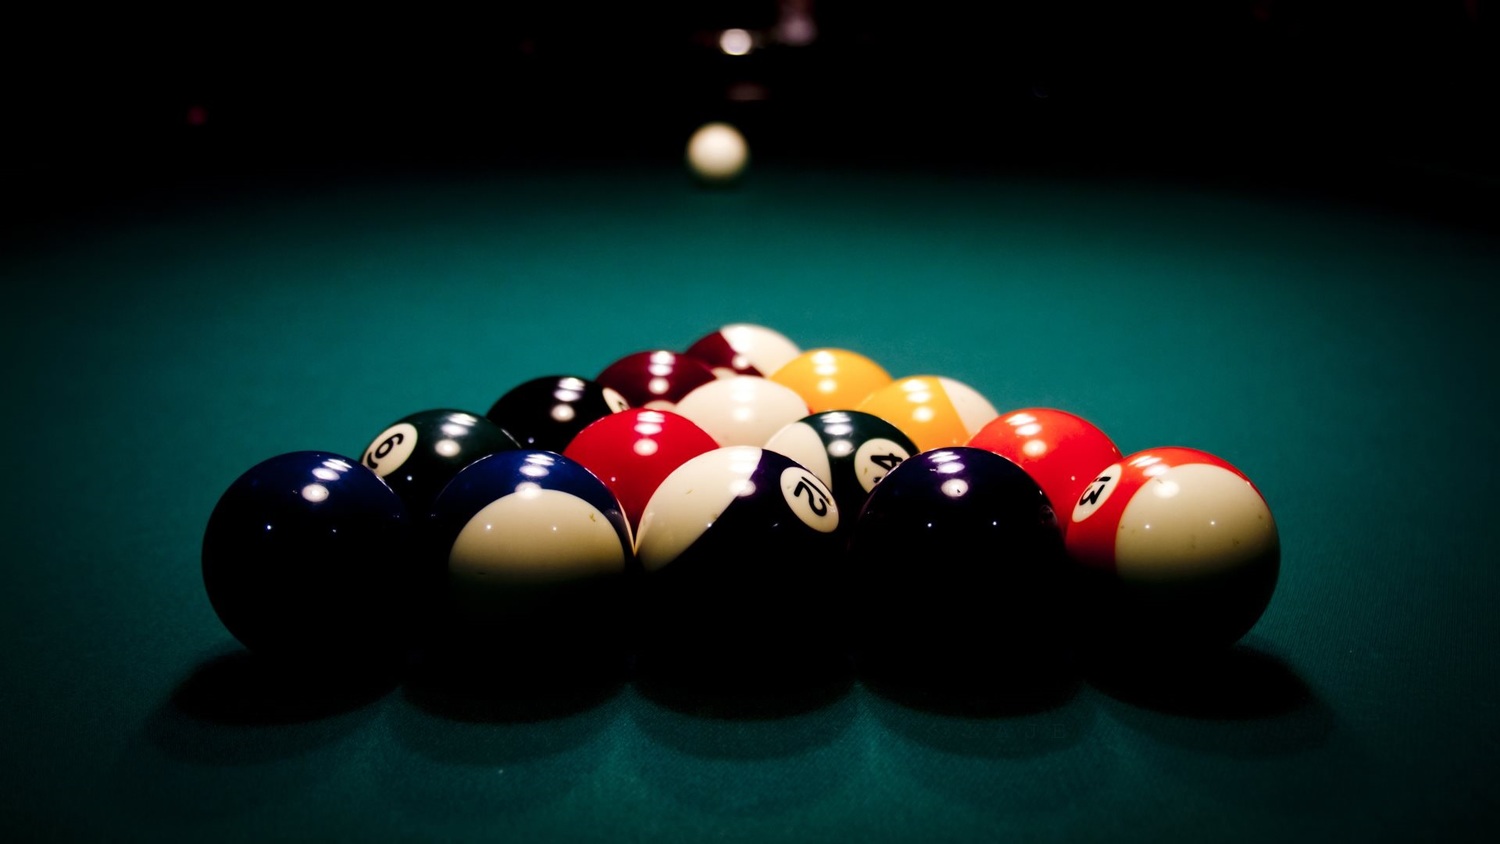 Is billiards a sport or a hobby?